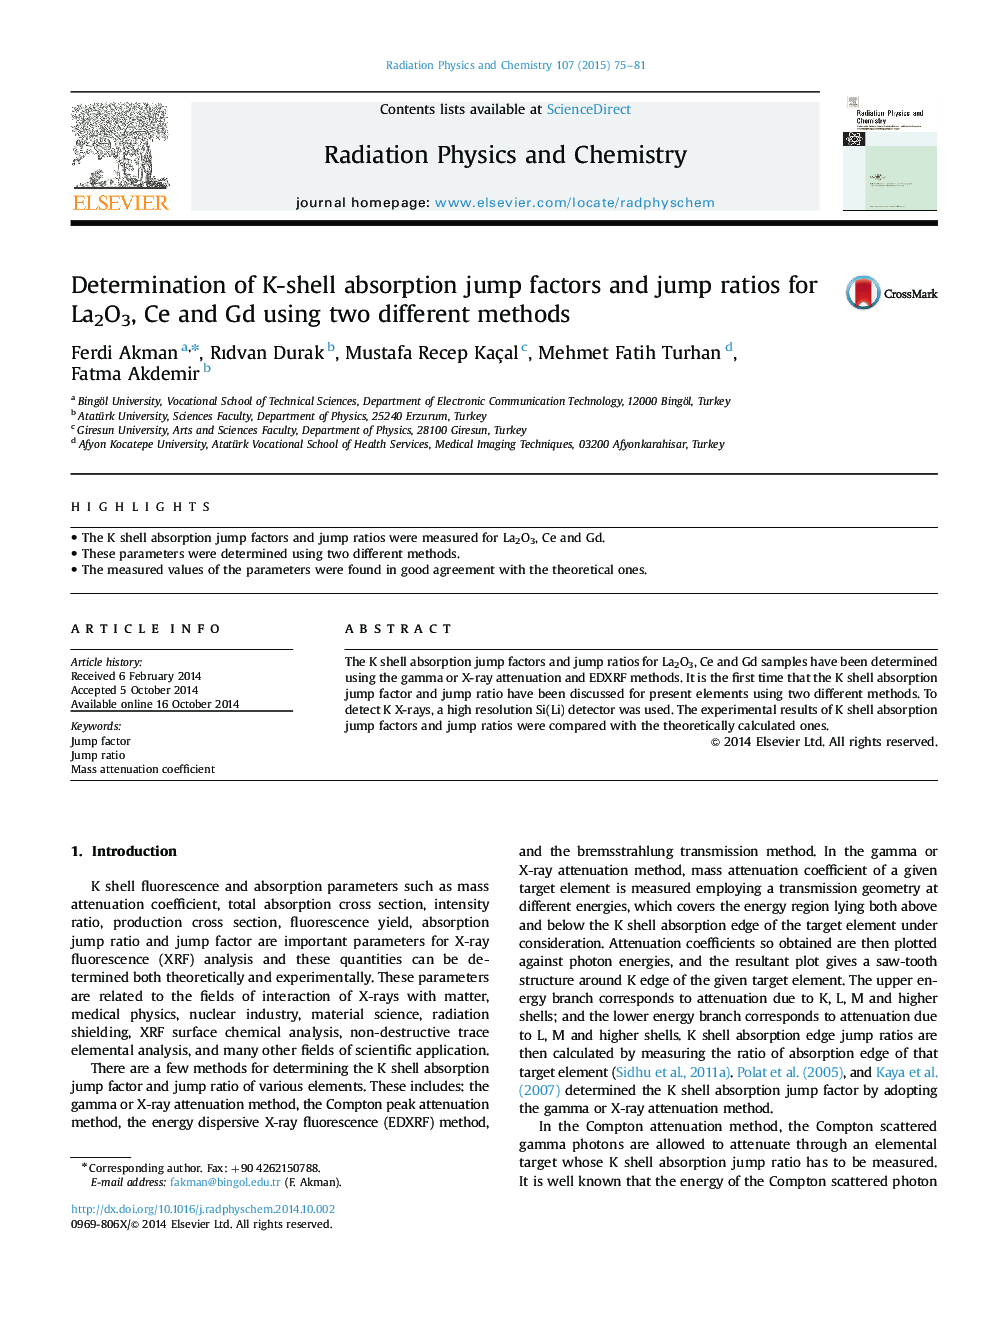 Determination of K-shell absorption jump factors and jump ratios for La2O3, Ce and Gd using two different methods